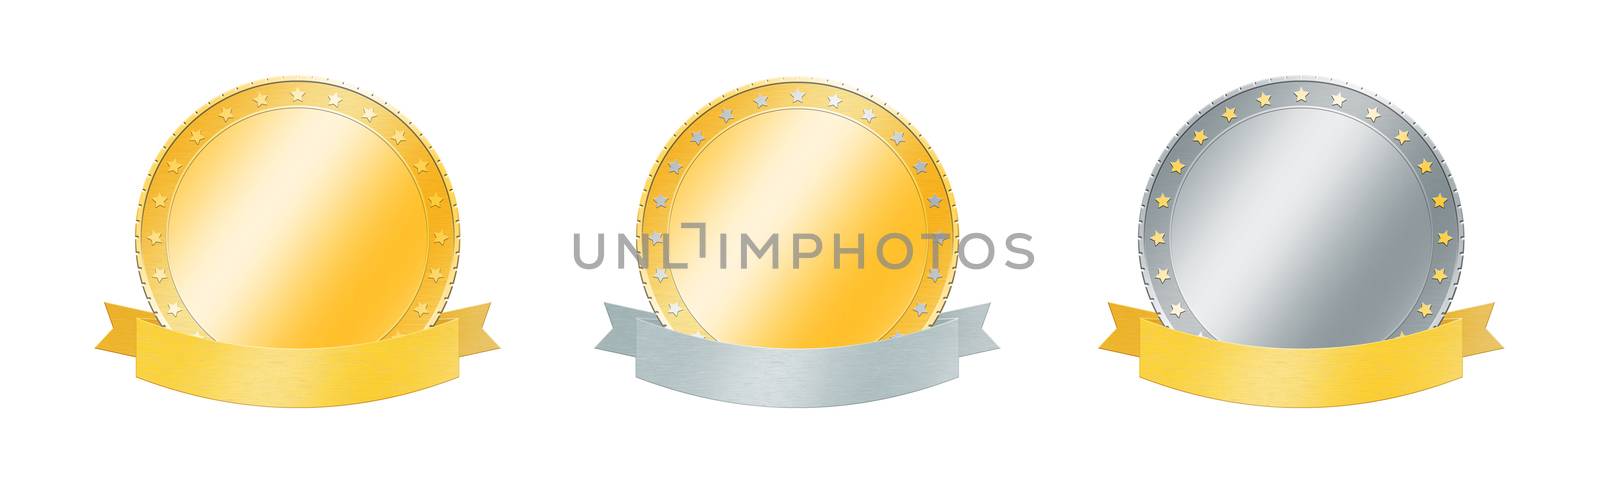 Set of three gold and silver achievement and award badges or medals with metal ribbon banners isolated on white background